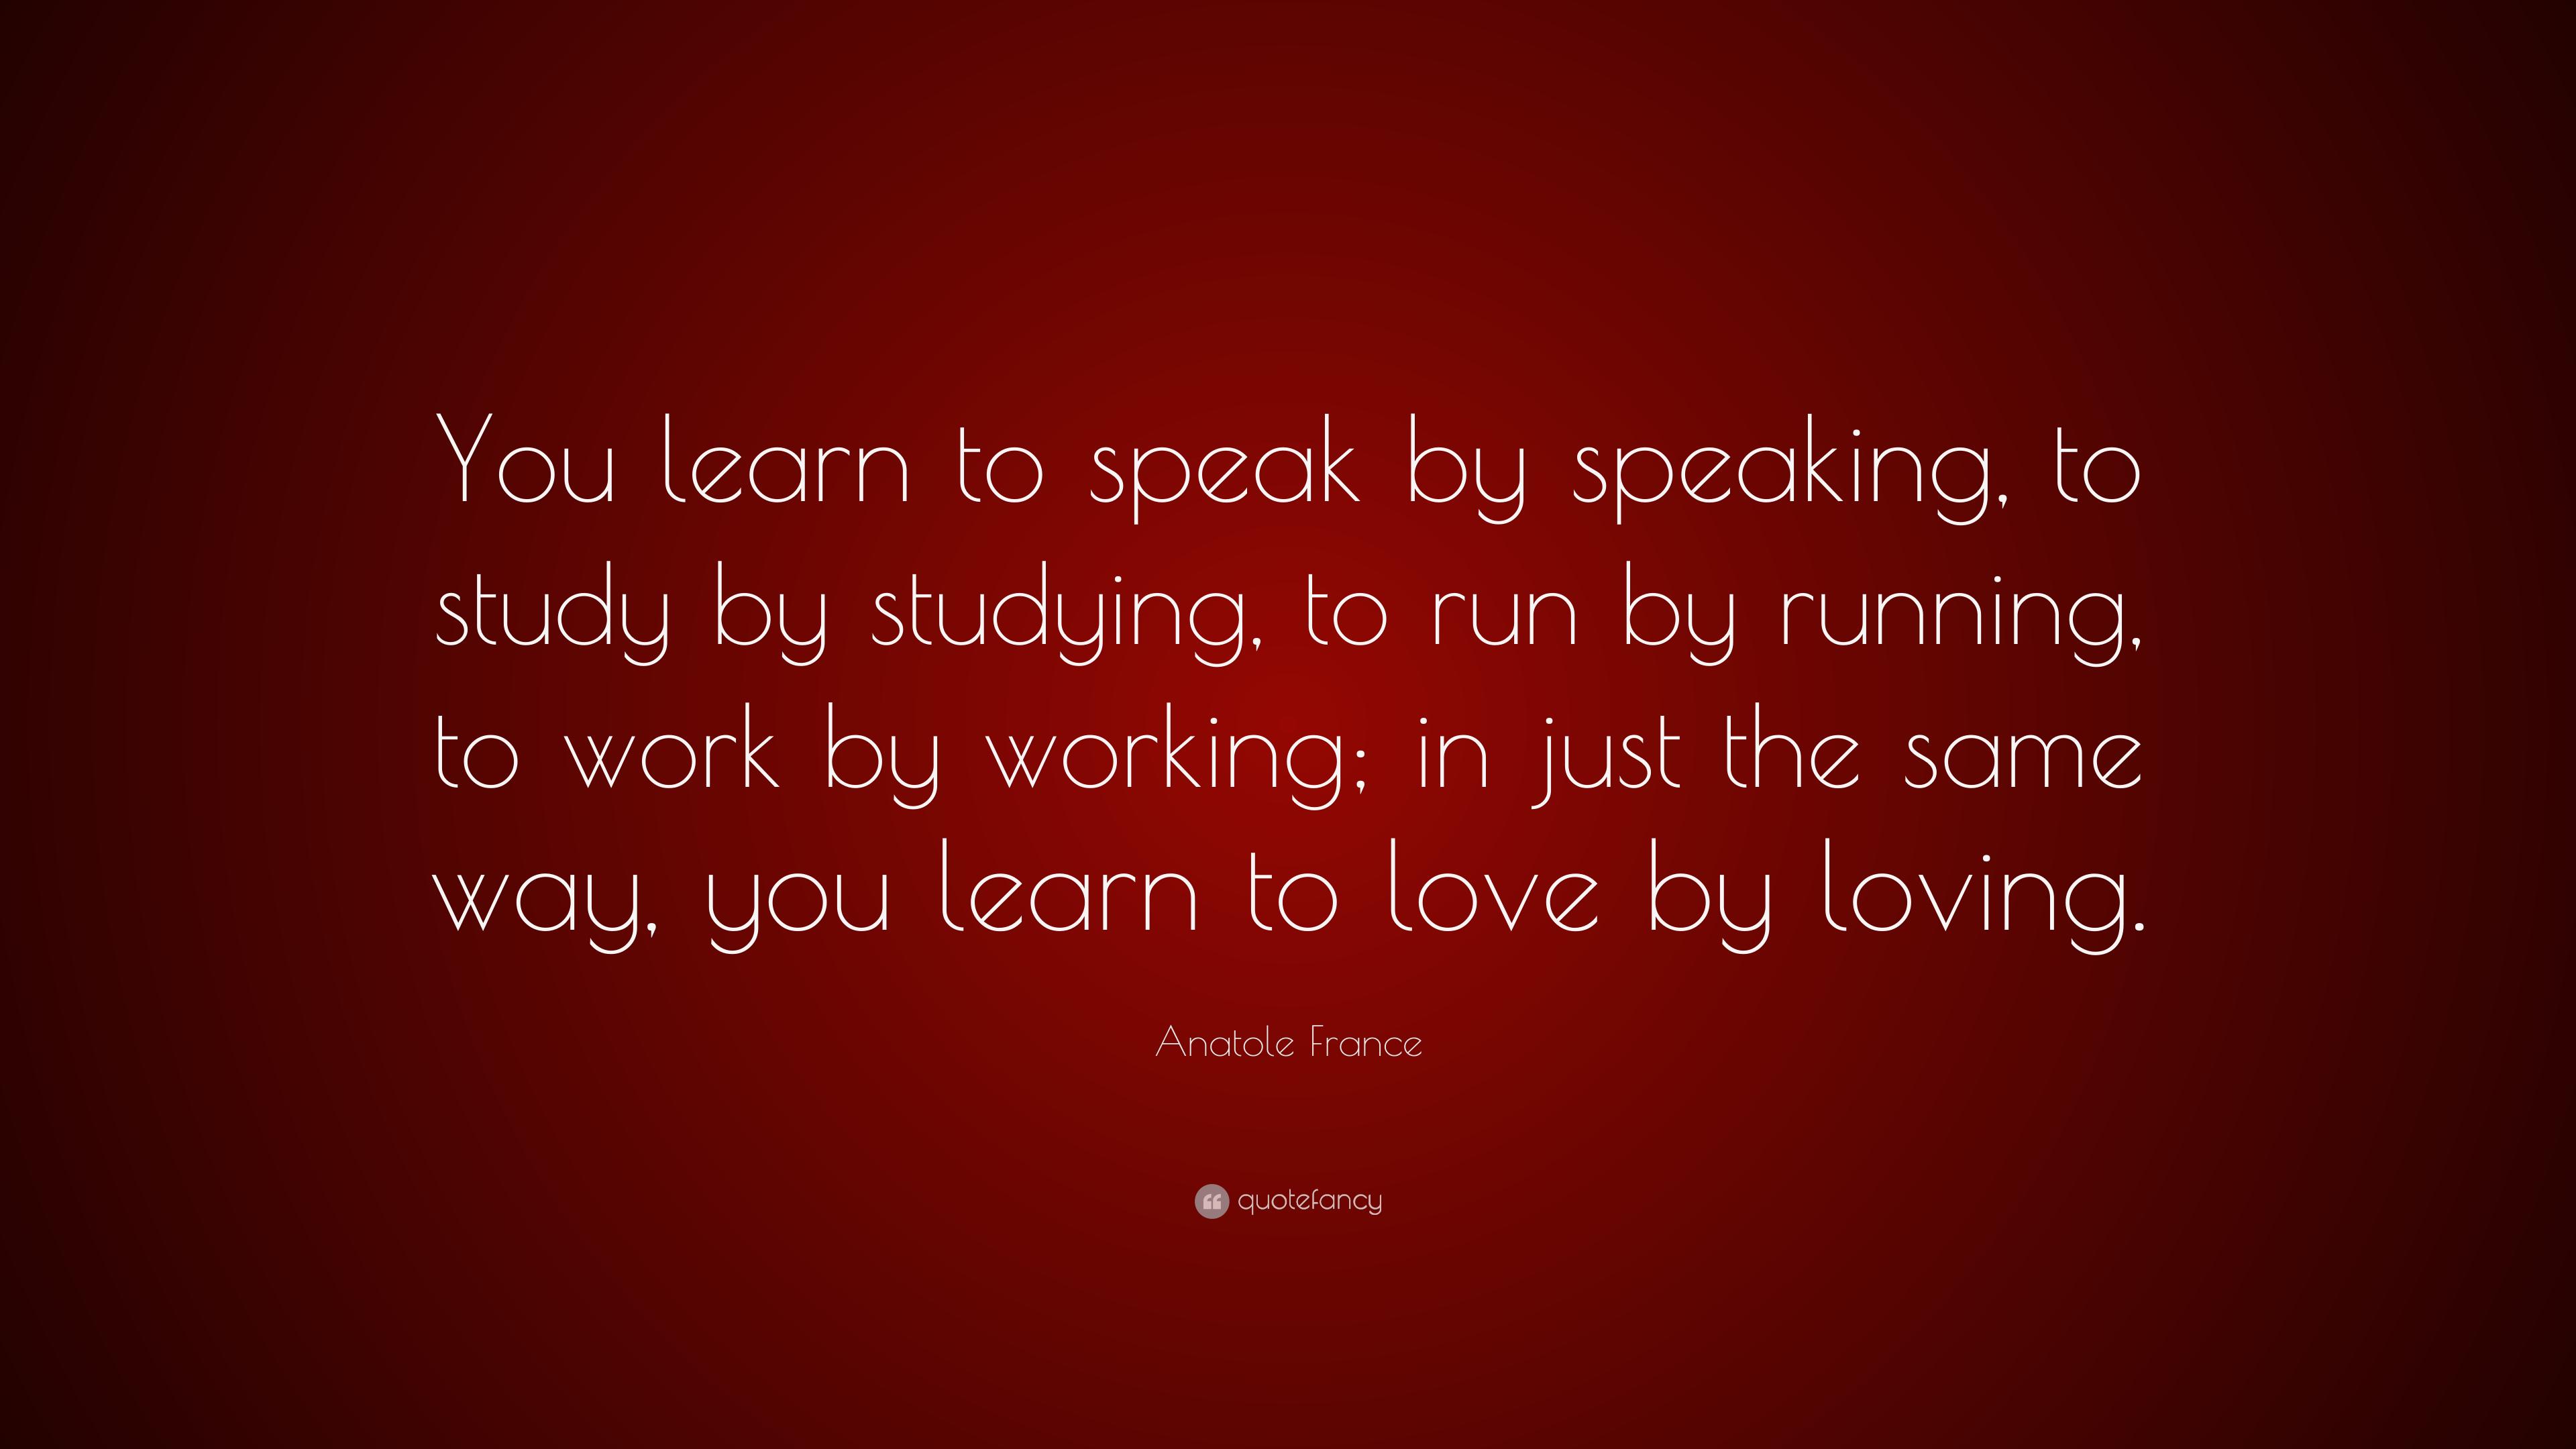 Anatole France Quote: “You learn to speak by speaking, to study